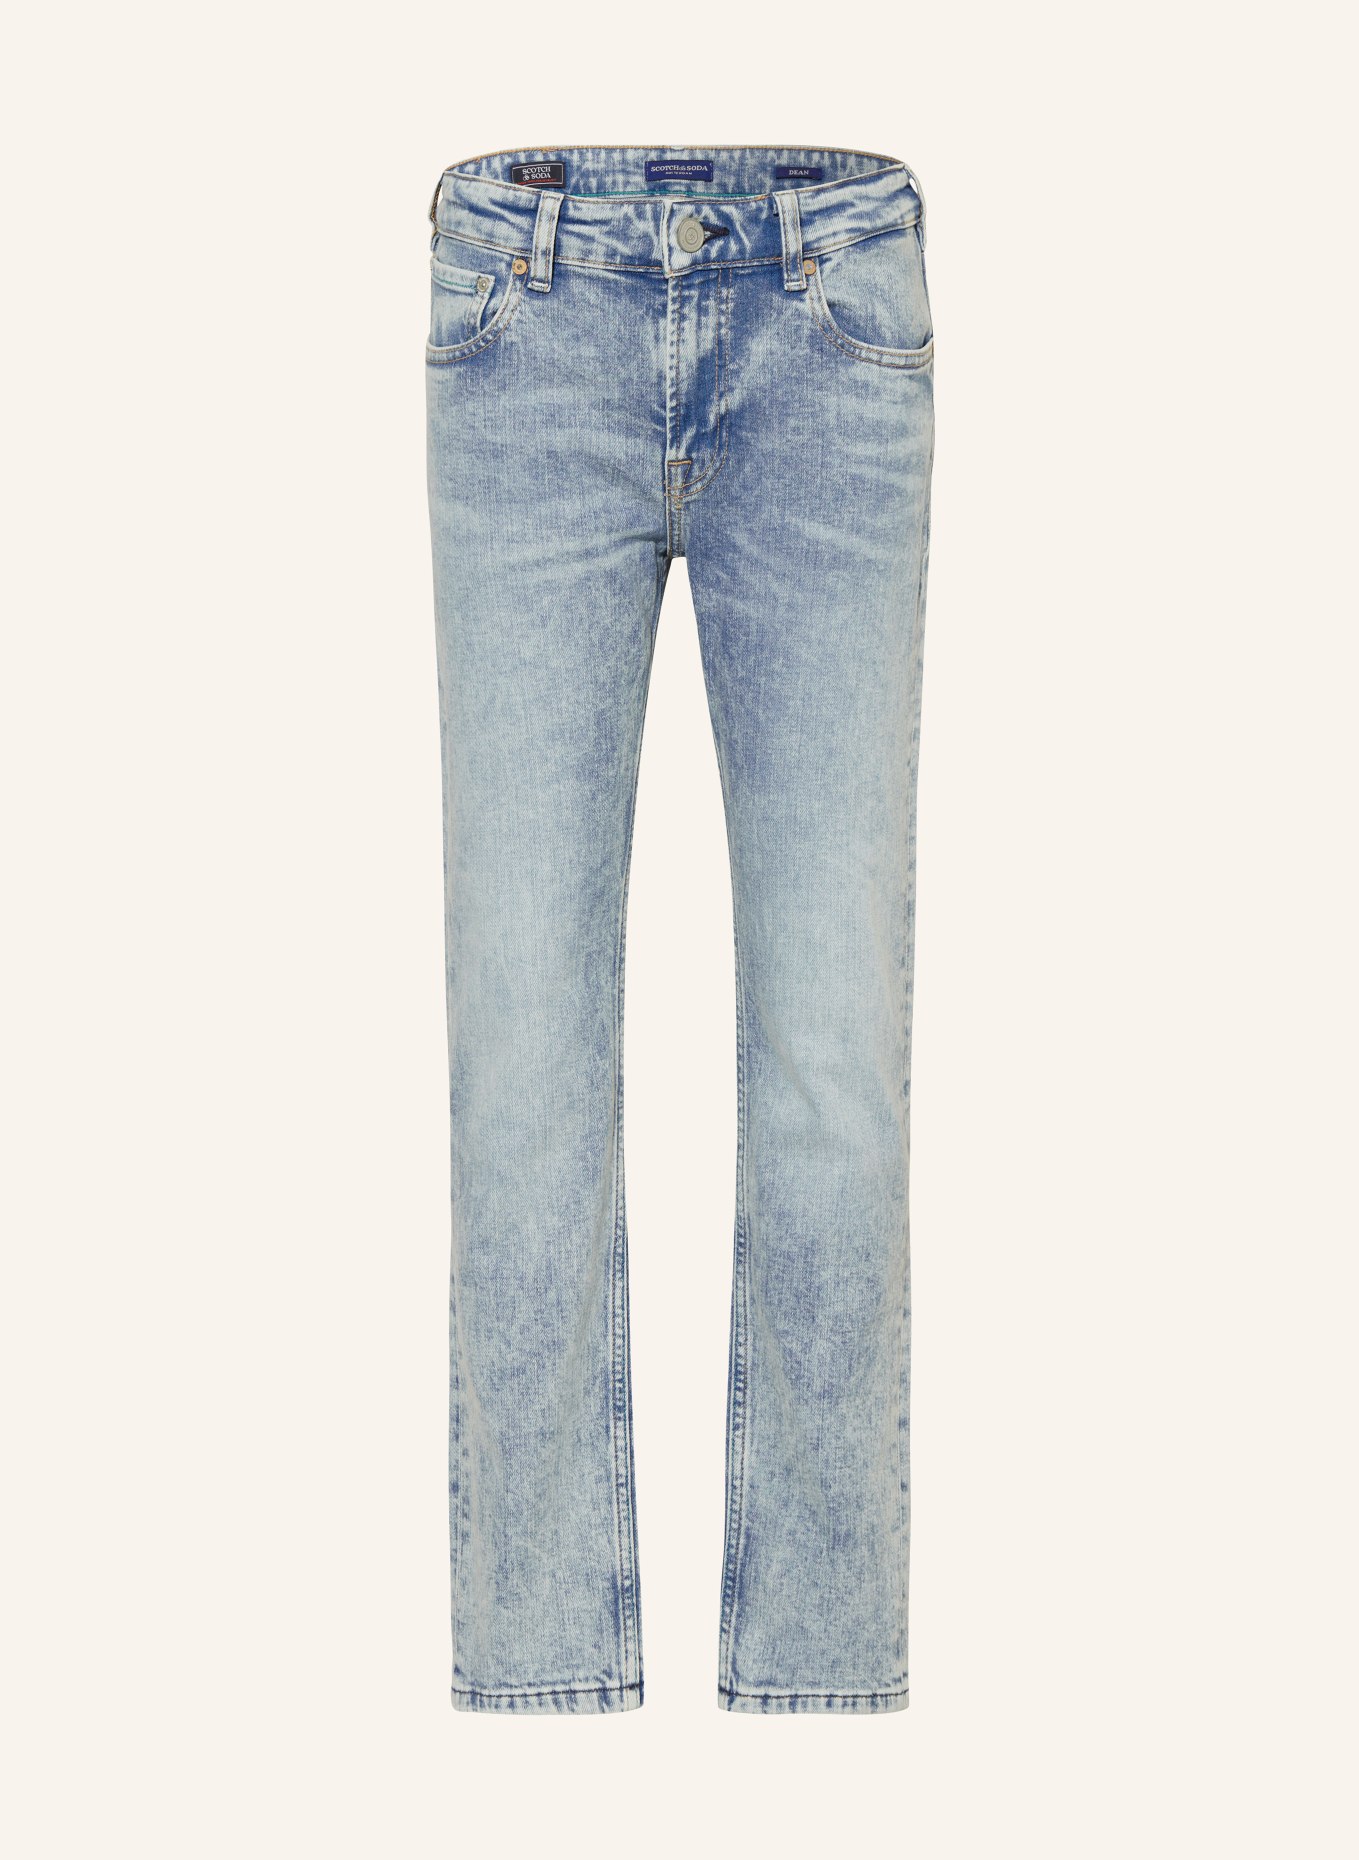 SCOTCH & SODA Jeans THE DEAN Loose Tapered Fit, Farbe: 7082 Freshen Up (Bild 1)